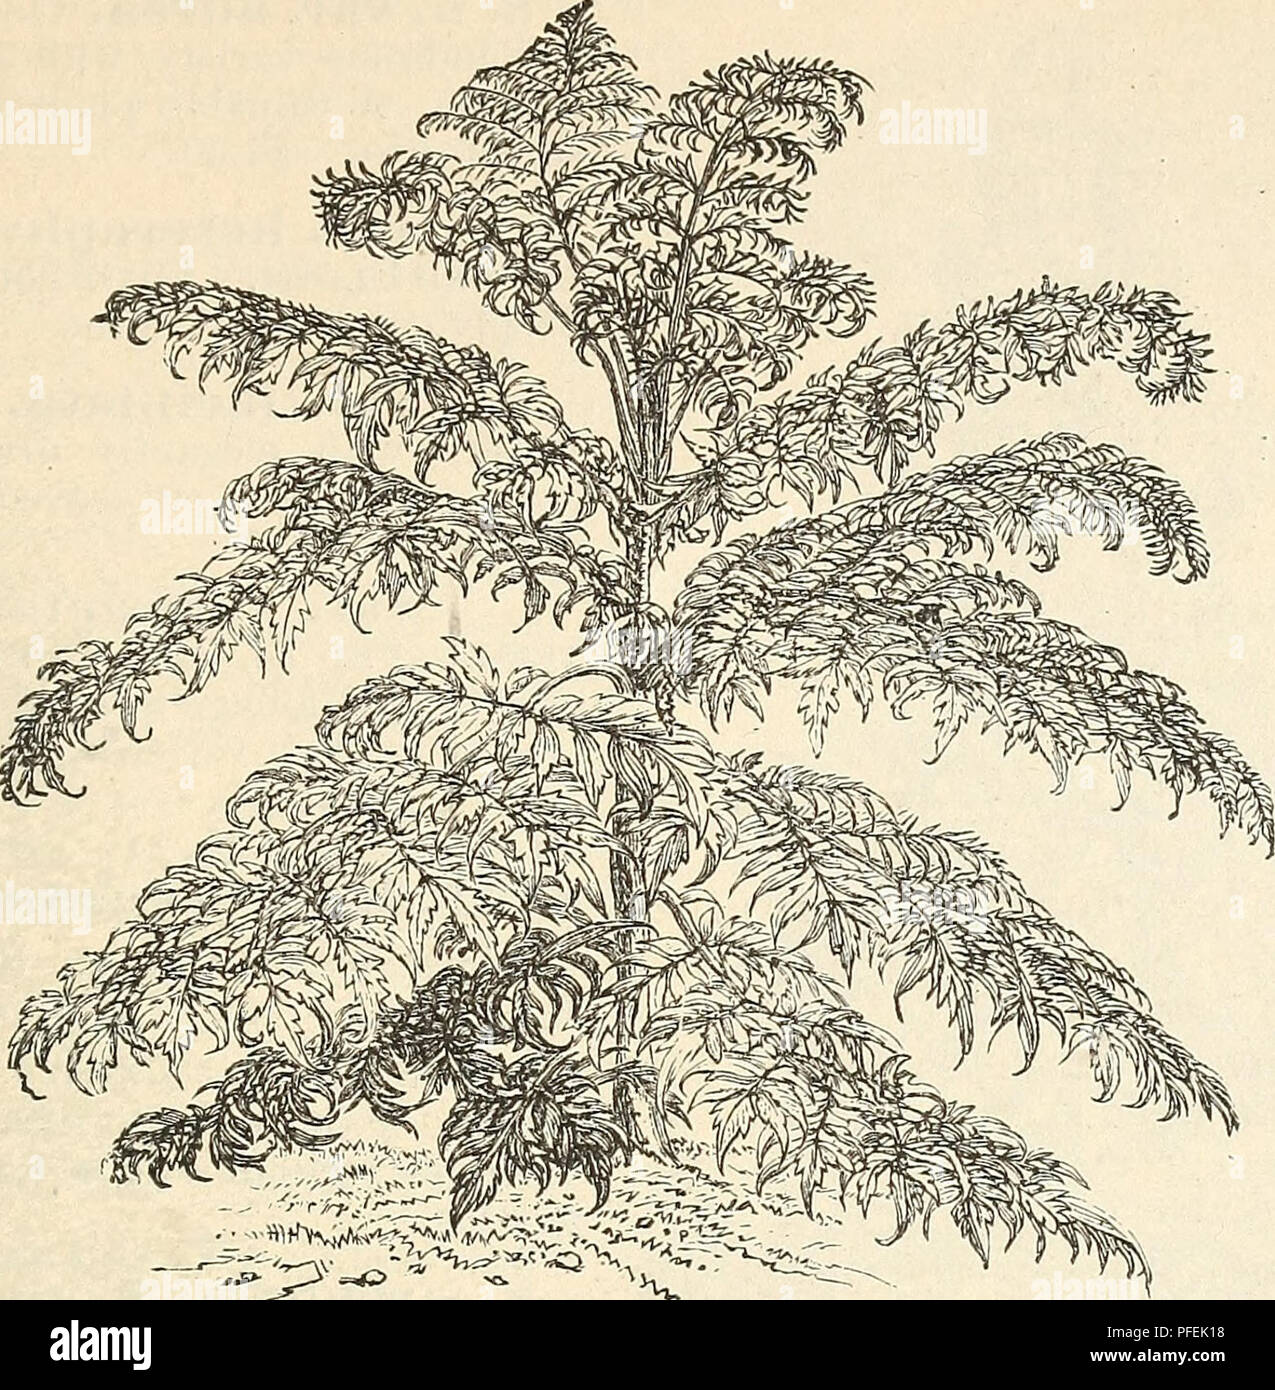 . Descriptive catalogue of hardy ornamental trees, shrubs, herbaceous perennial plants, etc. : twenty-fourth edition. Ornamental trees Catalogs; Shrubs Catalogs; Roses Catalogs; Flowers Catalogs. ORNAMENTAL TREES, SHRUBS, ETC. 69. RHUS GLABRA YAR. LACINIATA—CUT-LEAVED SUMACH. K. glabra var. laciniata. Cut-leaved Sumach. A very striking plant, with deeply cut leaves resembling fern leaves ; dark green above and glaucous below, rand turning to a rich red in autumn. See cut. 75 cents.  R. Osbecki. A beautiful species from China, with remarkable and very orna- mental foliage. 75 cents. KIBES. Curr Stock Photo